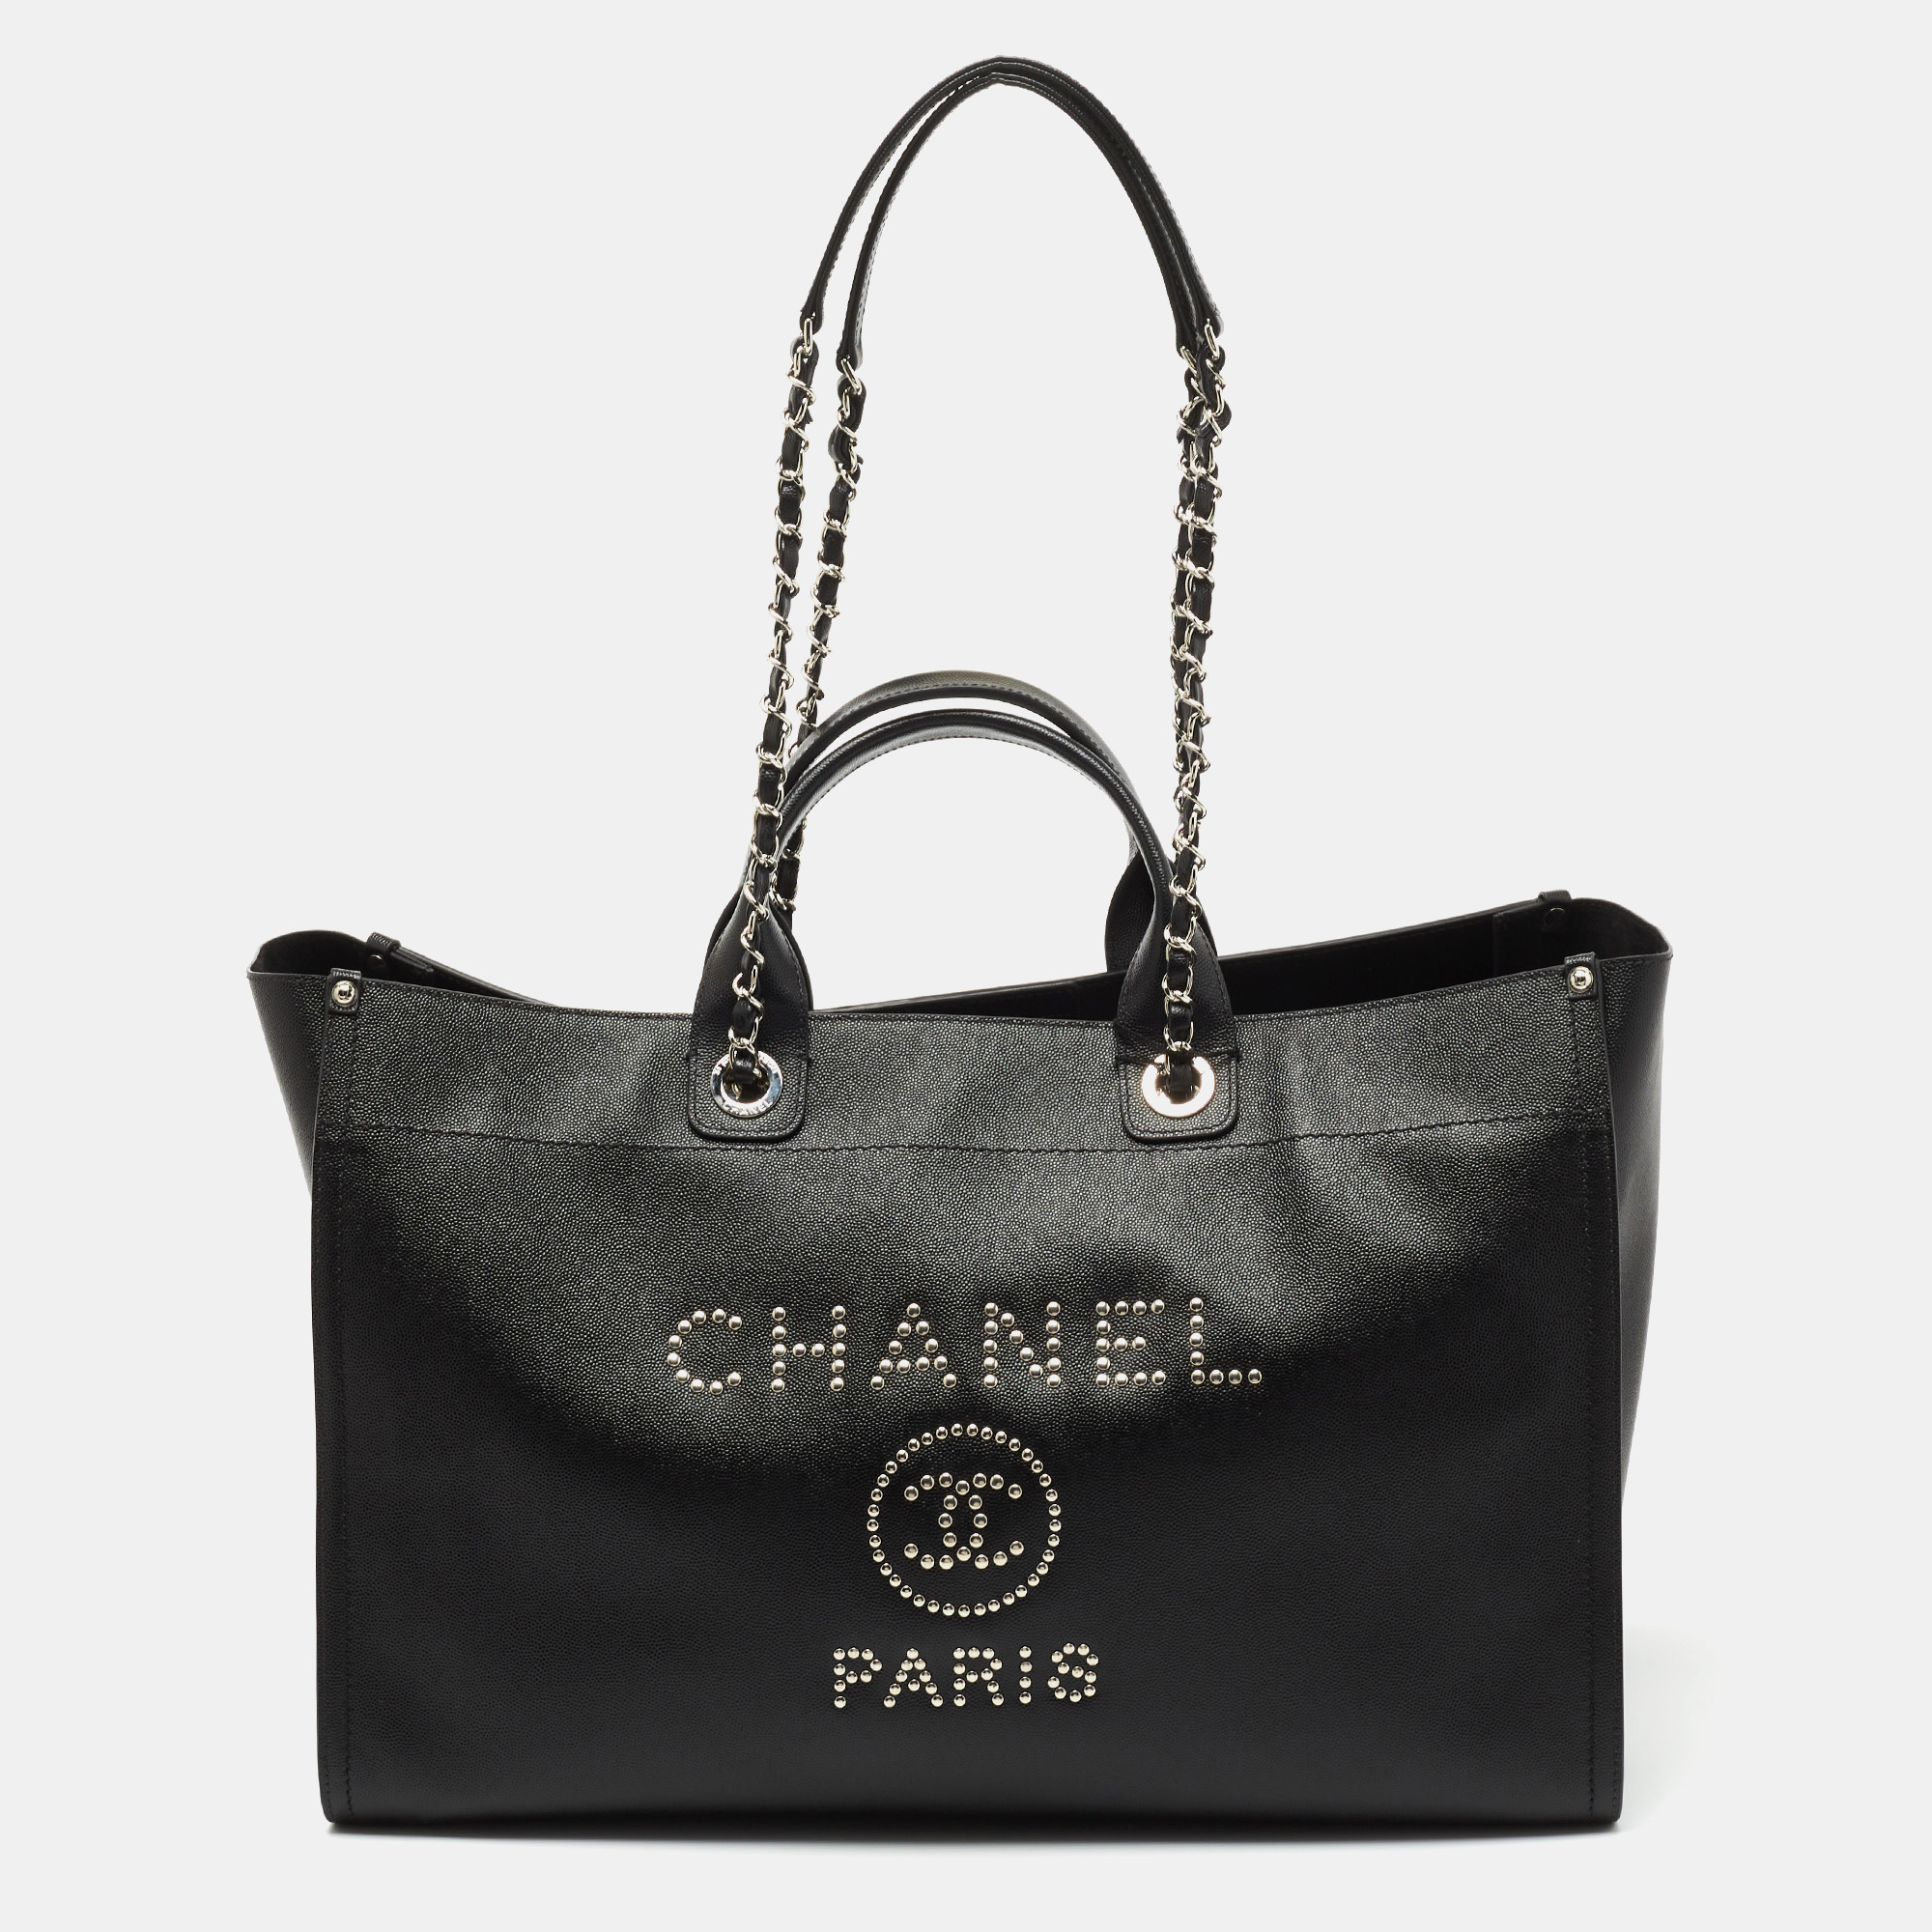 Chanel Black Caviar Studded Leather Large Deauville Shopping Tote